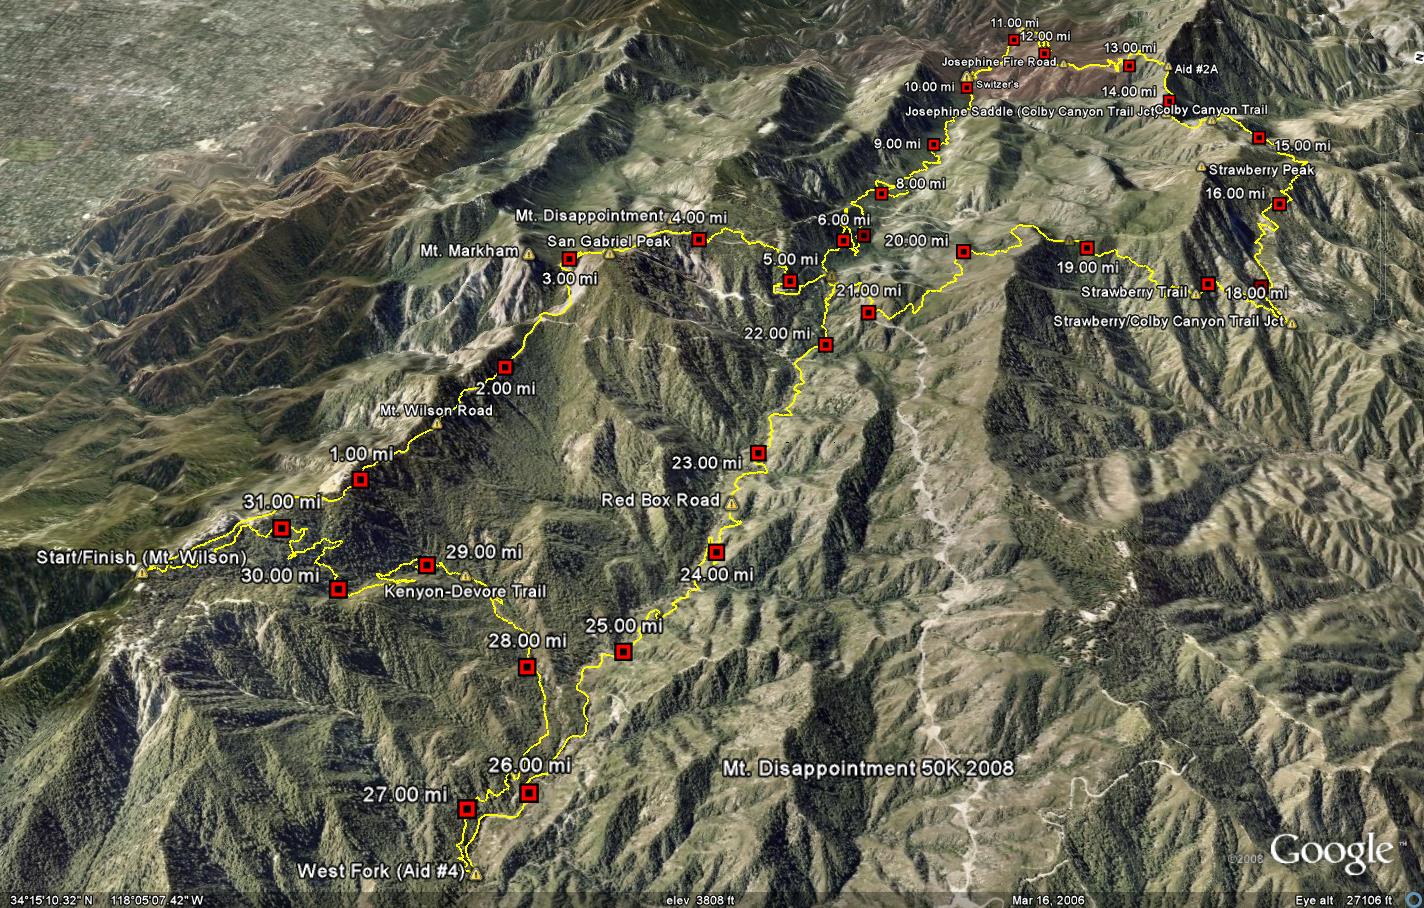 Google Earth image of a GPS trace of the Mt. Disappointment 50K course.